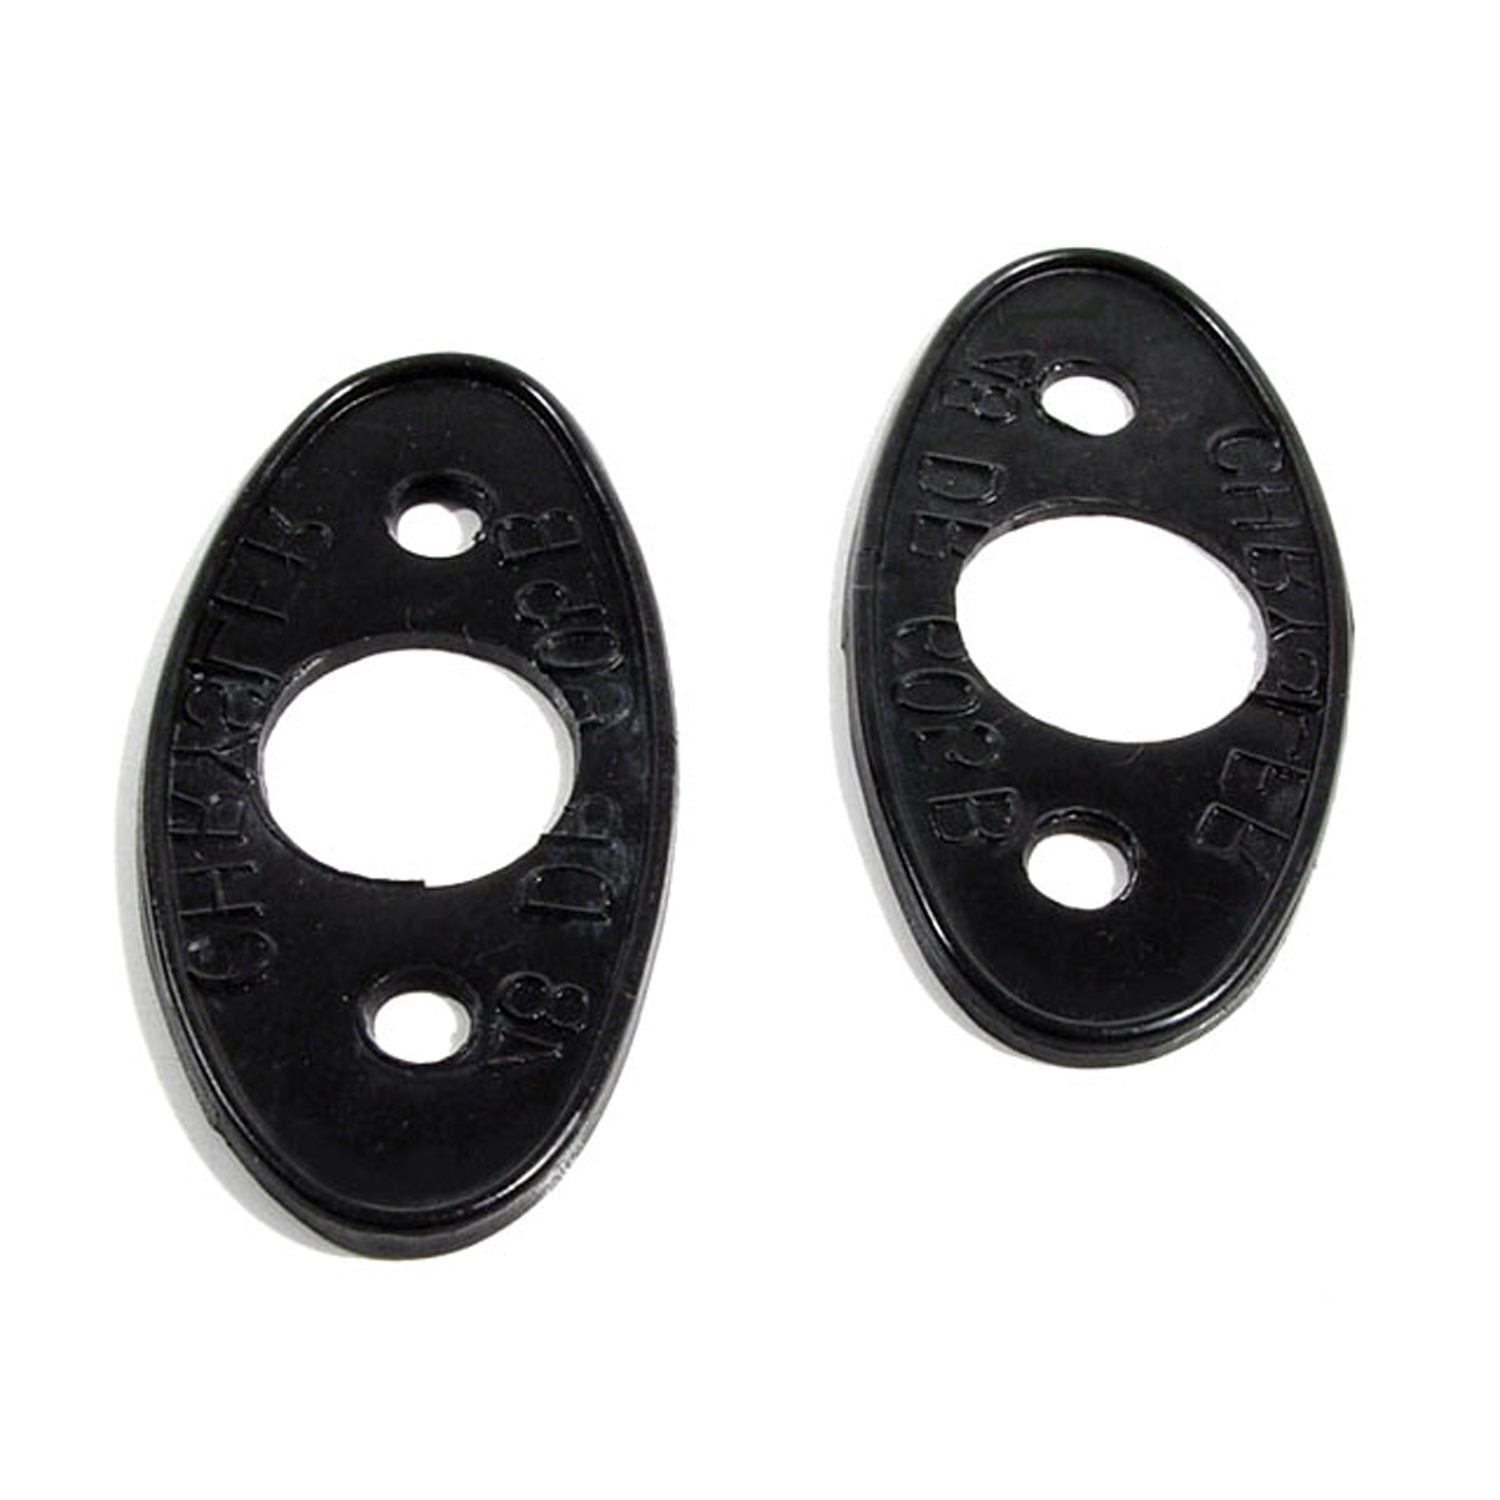 1947 Chrysler Town & Country Door Handle Pads.  1-1/4 wide X 2-5/8 long.  Pair-MP 605-B